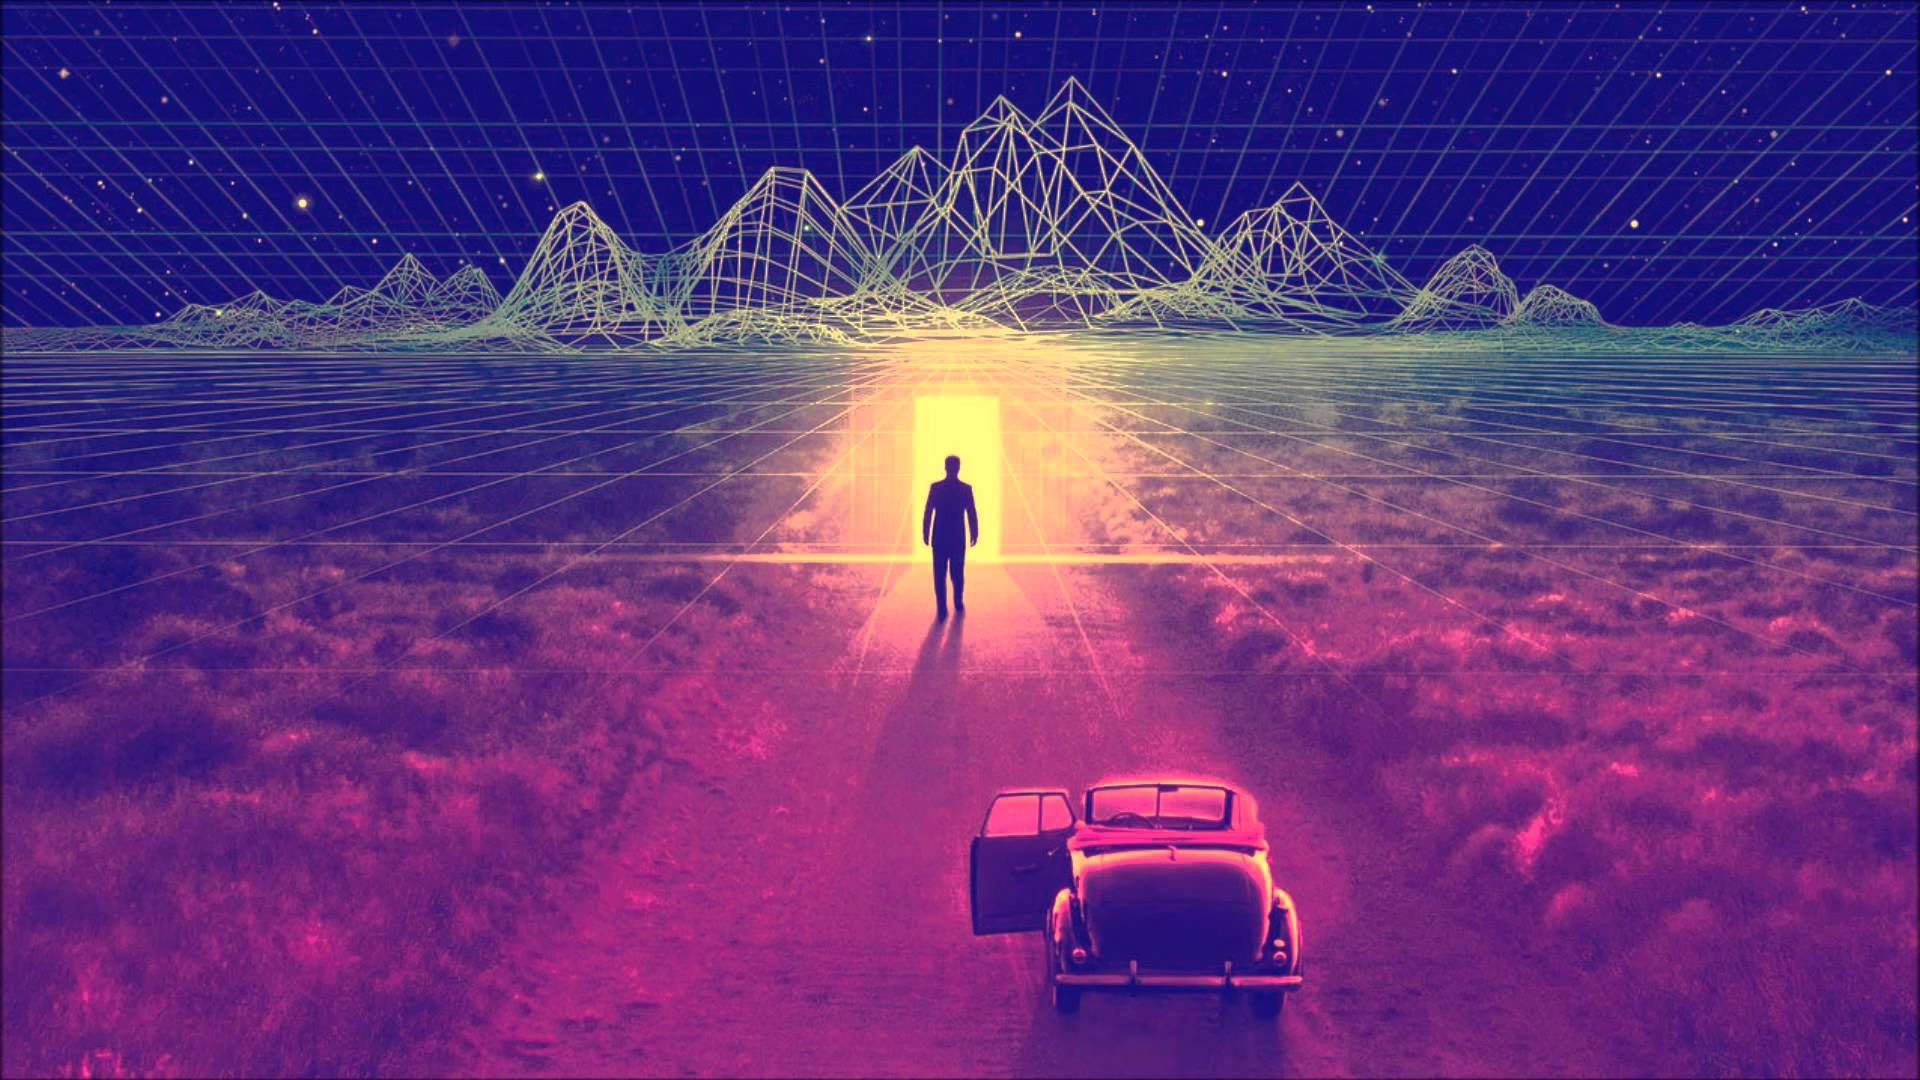 Retrowave/Synthwave wallpaper [1920×1080] | Inspired by The Thirteenth  Floor (1999)